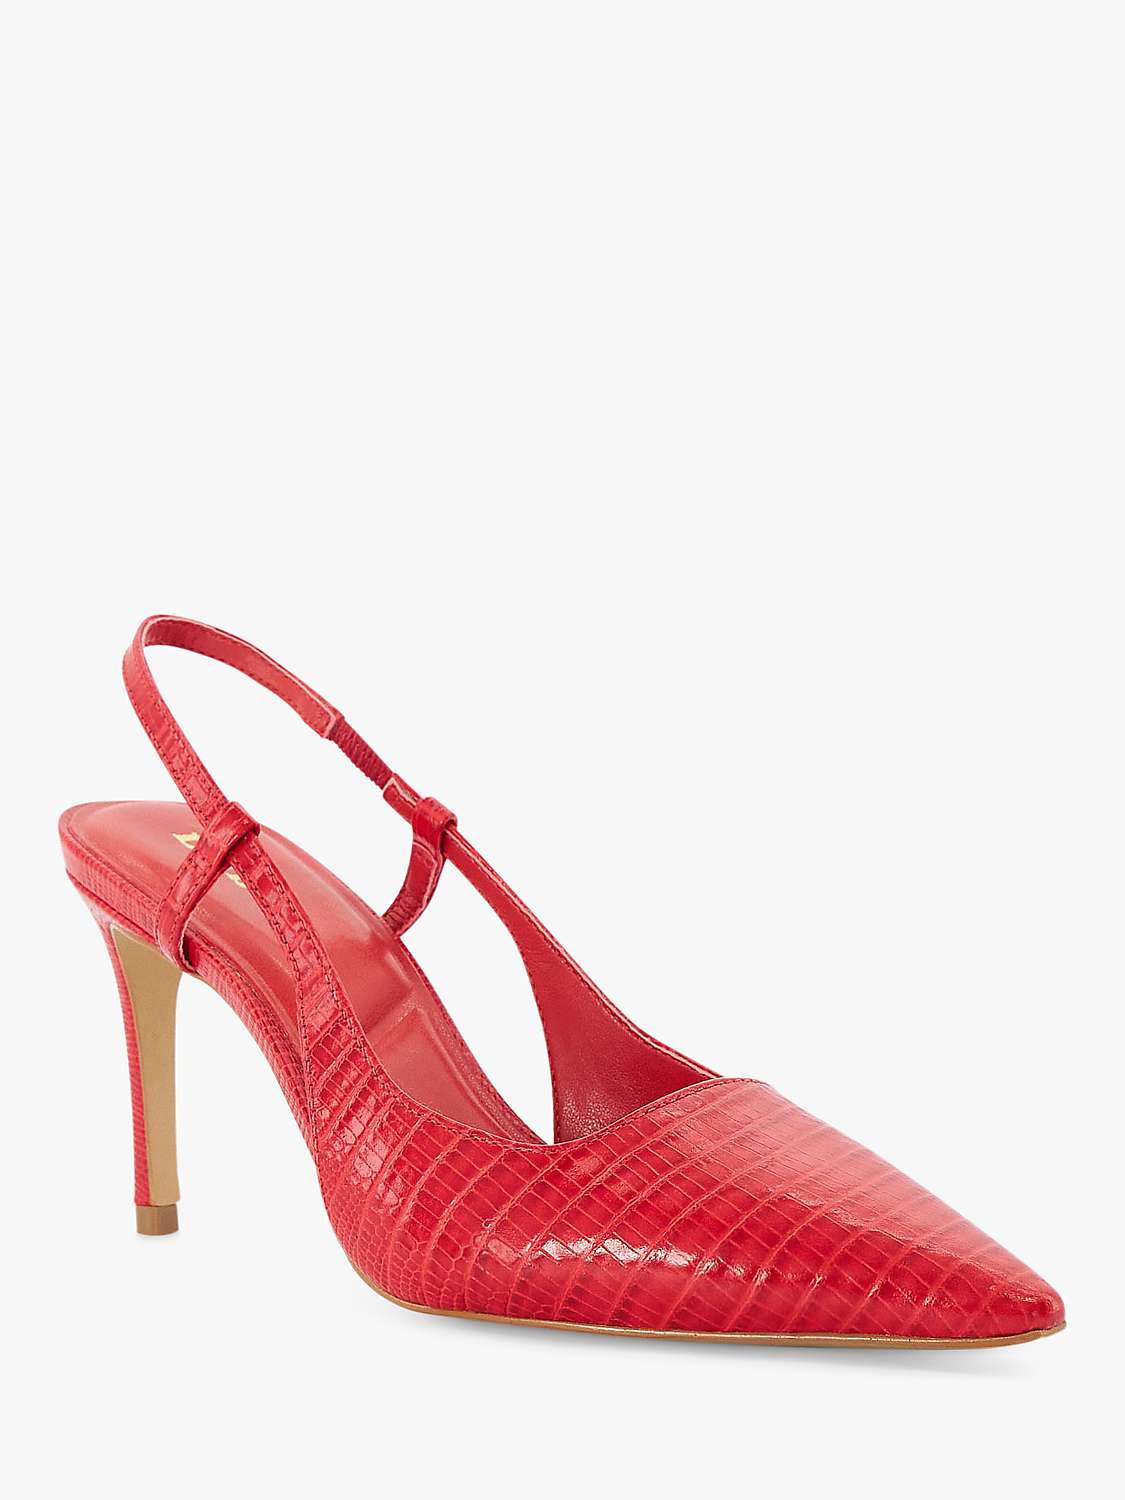 Buy Dune Closer Leather Reptile Print Slingback Court Shoes Online at johnlewis.com